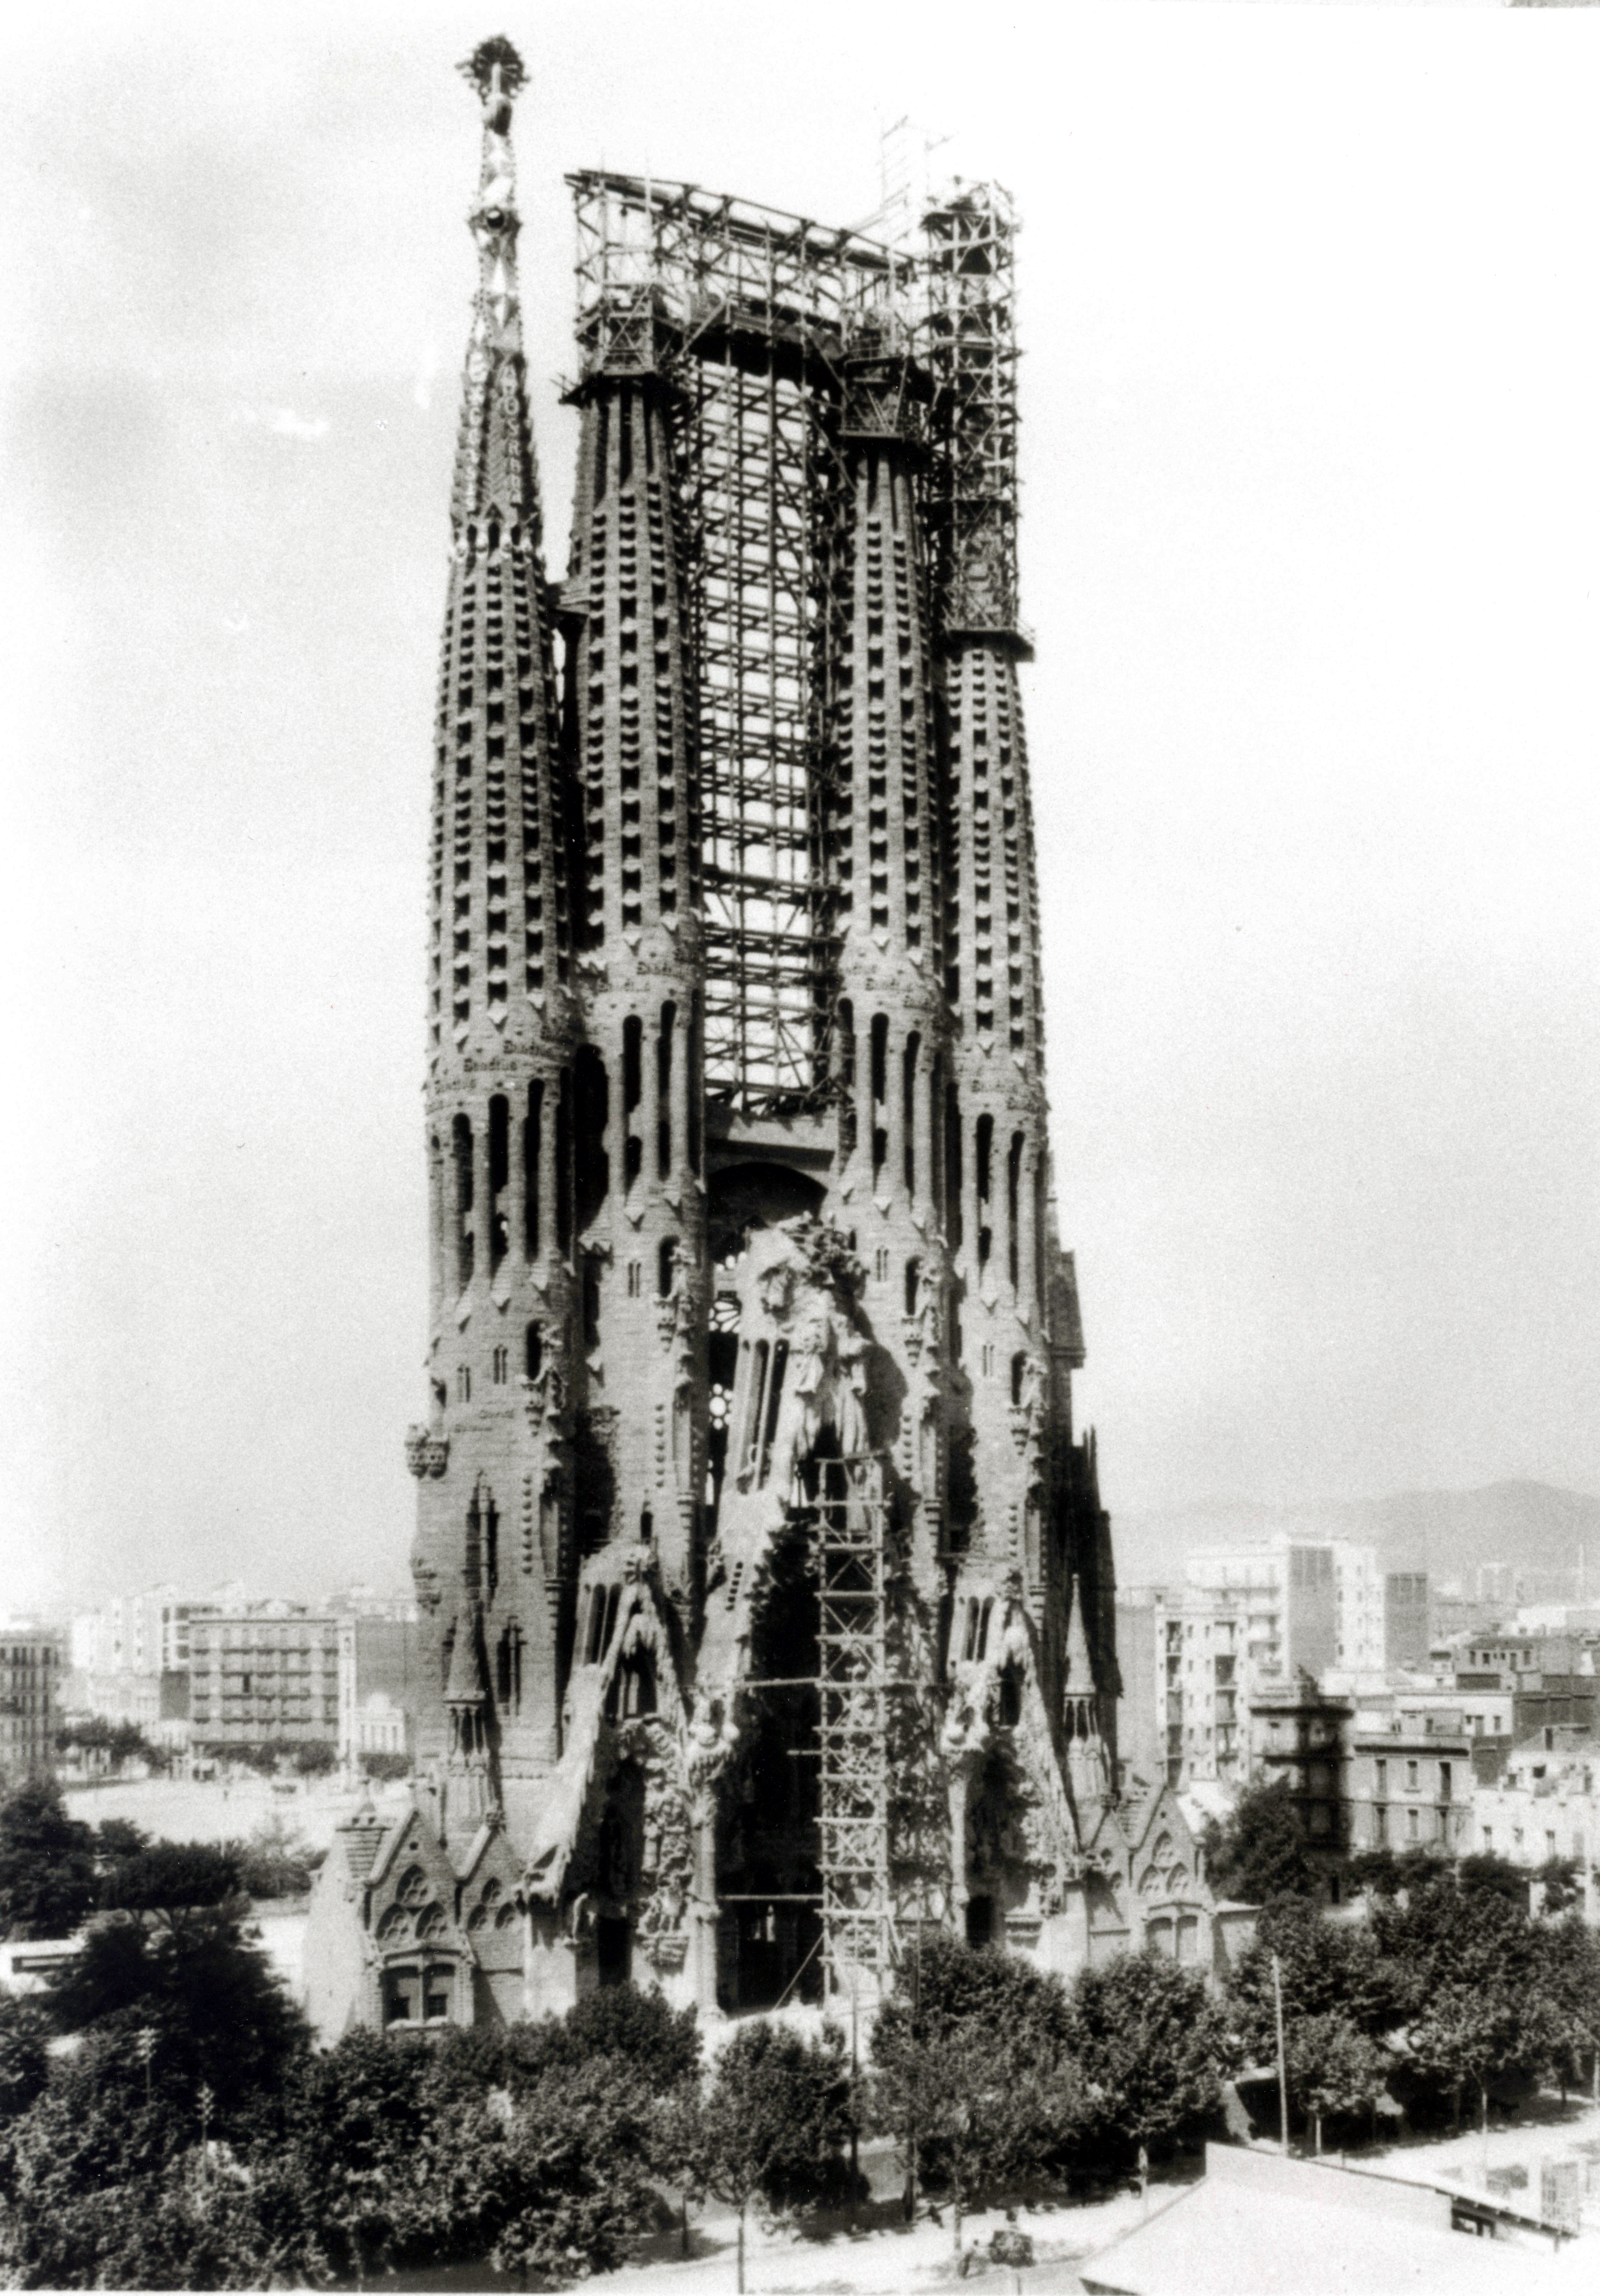 The bell tower dedicated to the apostle Barnabas was the only one Gaudí would see finished.